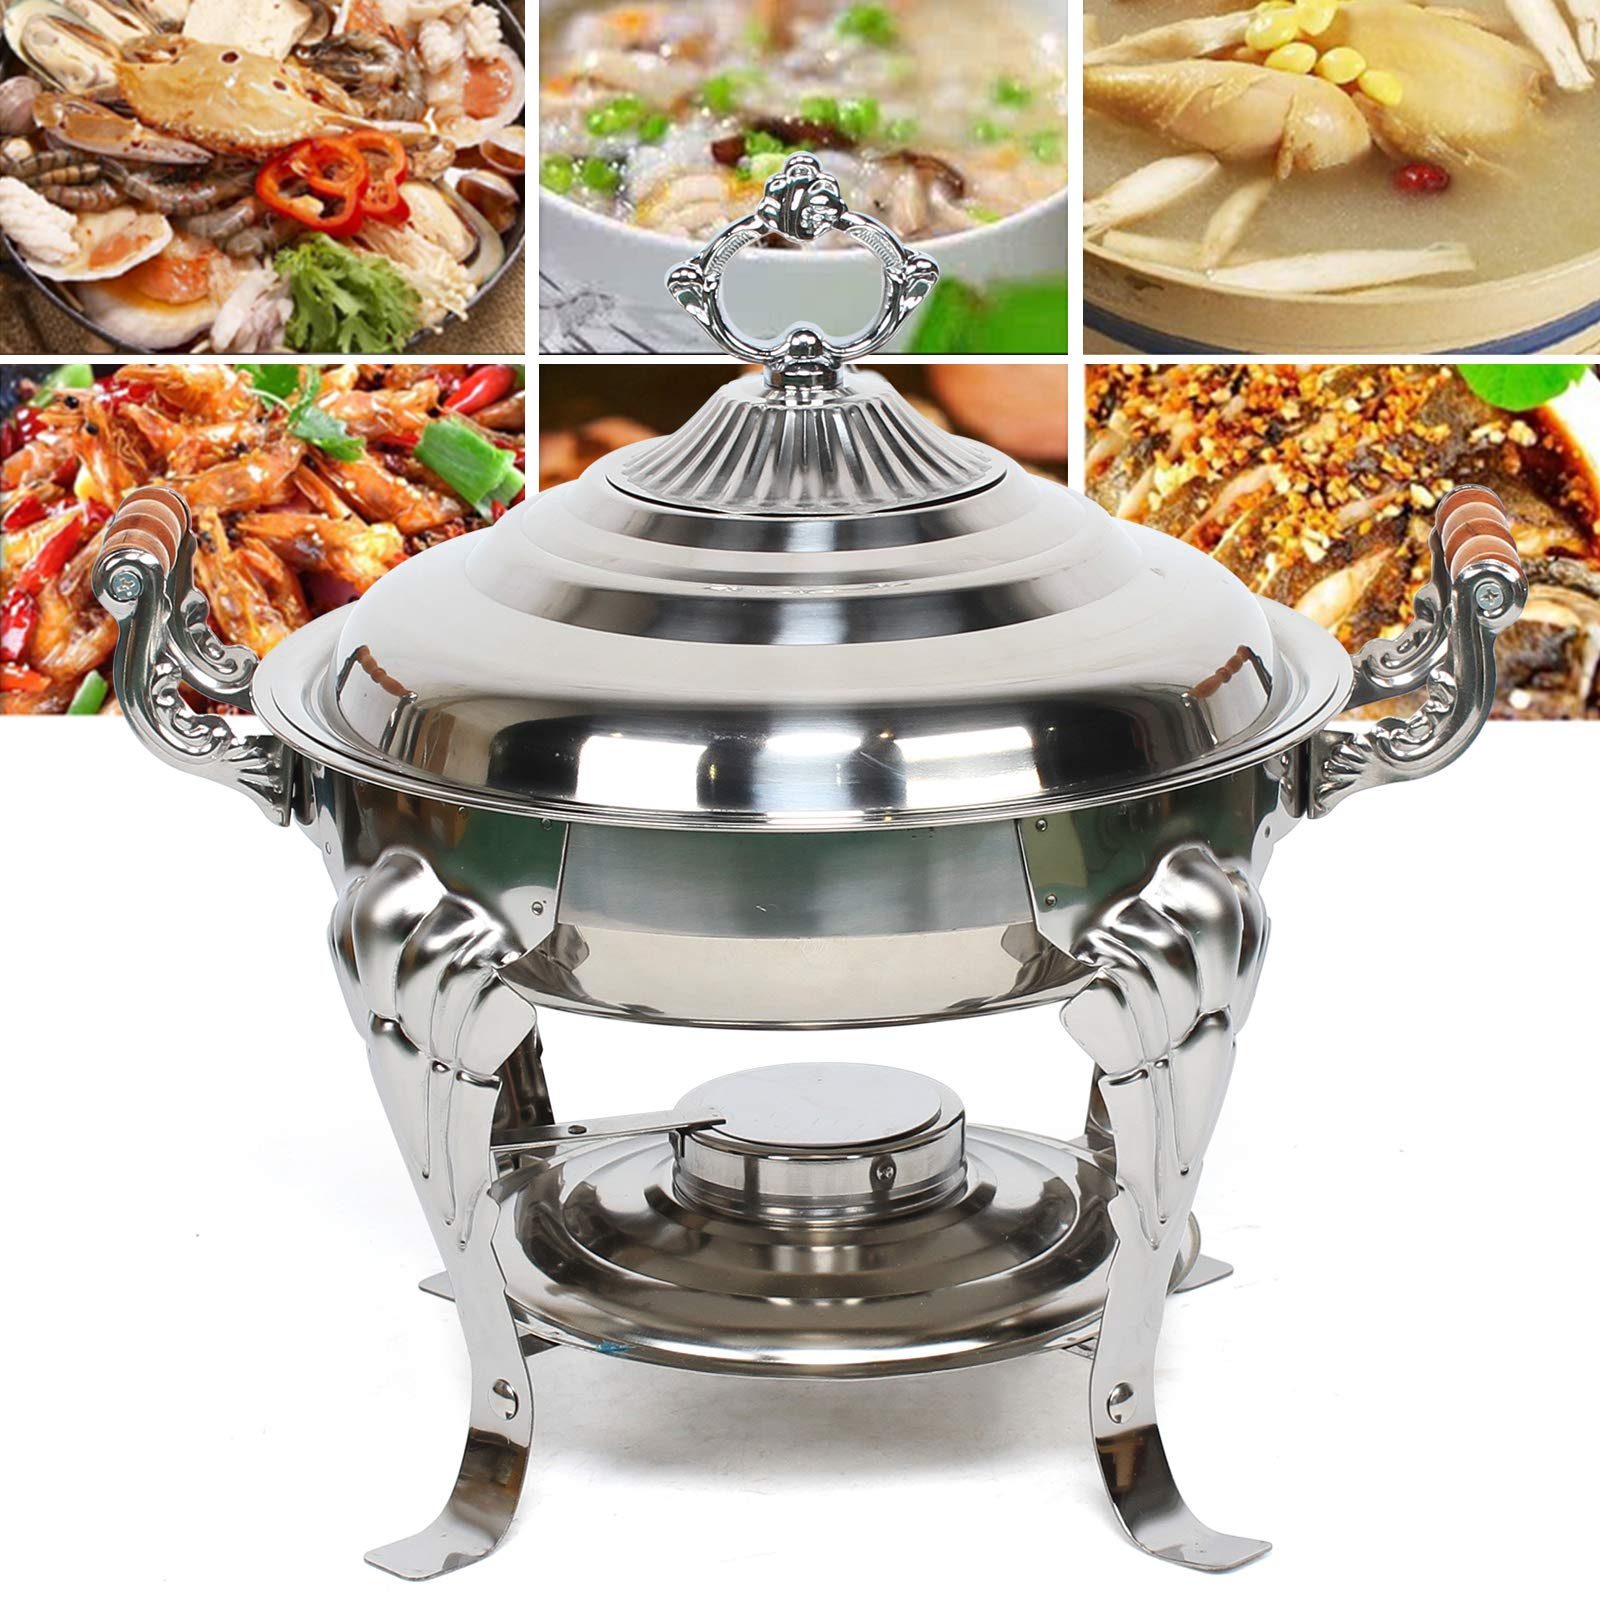 Food Service Equipment for Gatherings New Year Party